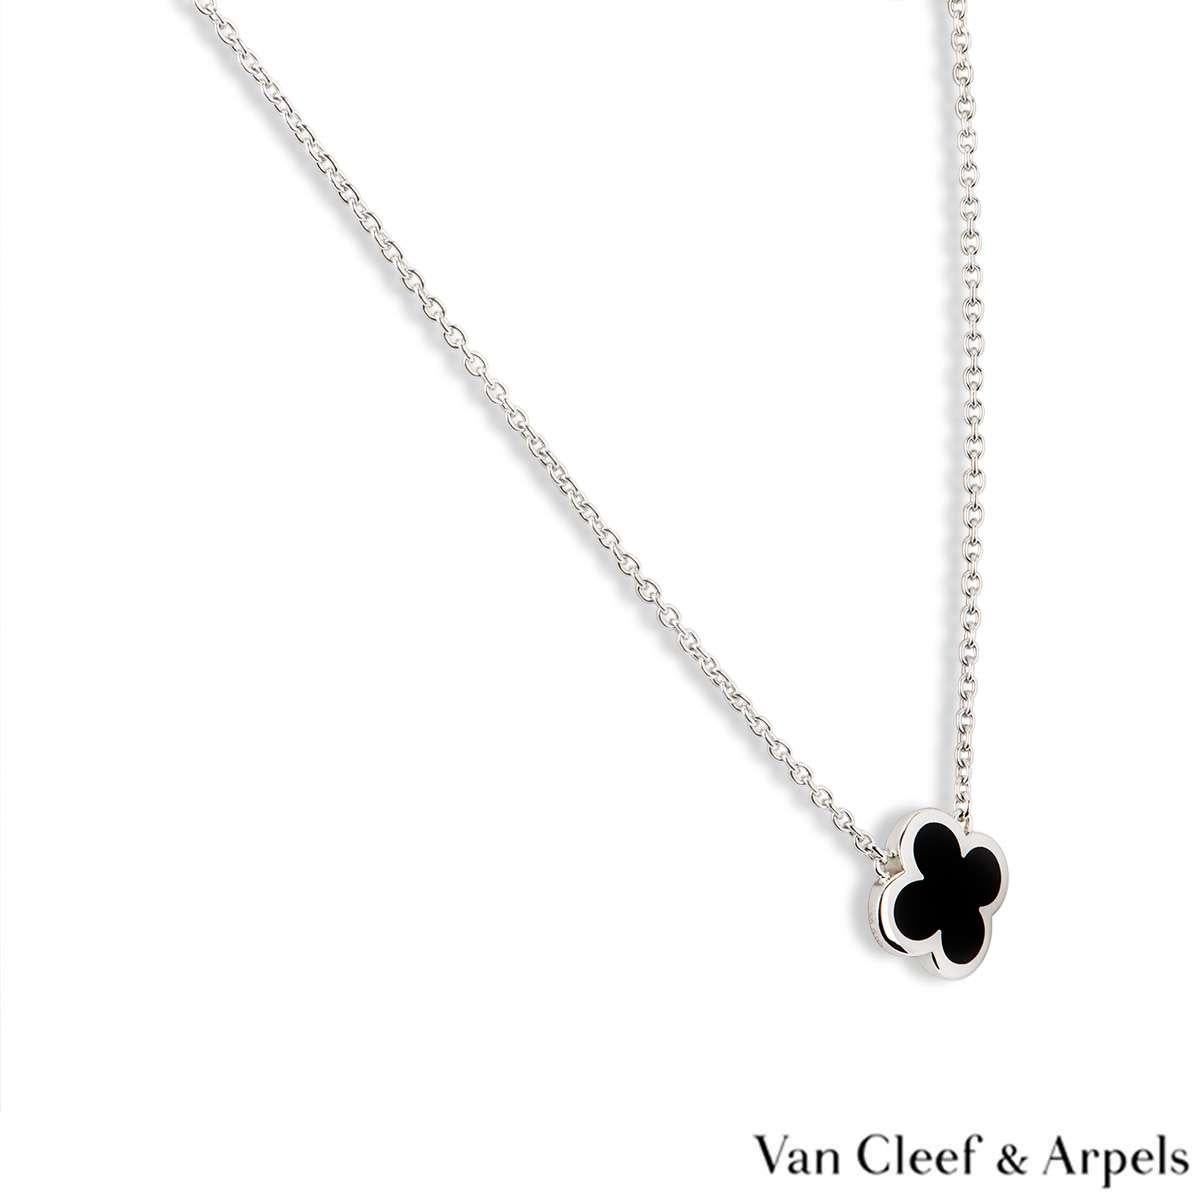 An 18k white gold pendant from the Pure Alhambra collection by Van Cleef & Arpels. The pendant features a four leaf clover motif with a black onyx inlay and a polished outer edge. The pendant measures 1.5cm in width and comes on an original 18 inch